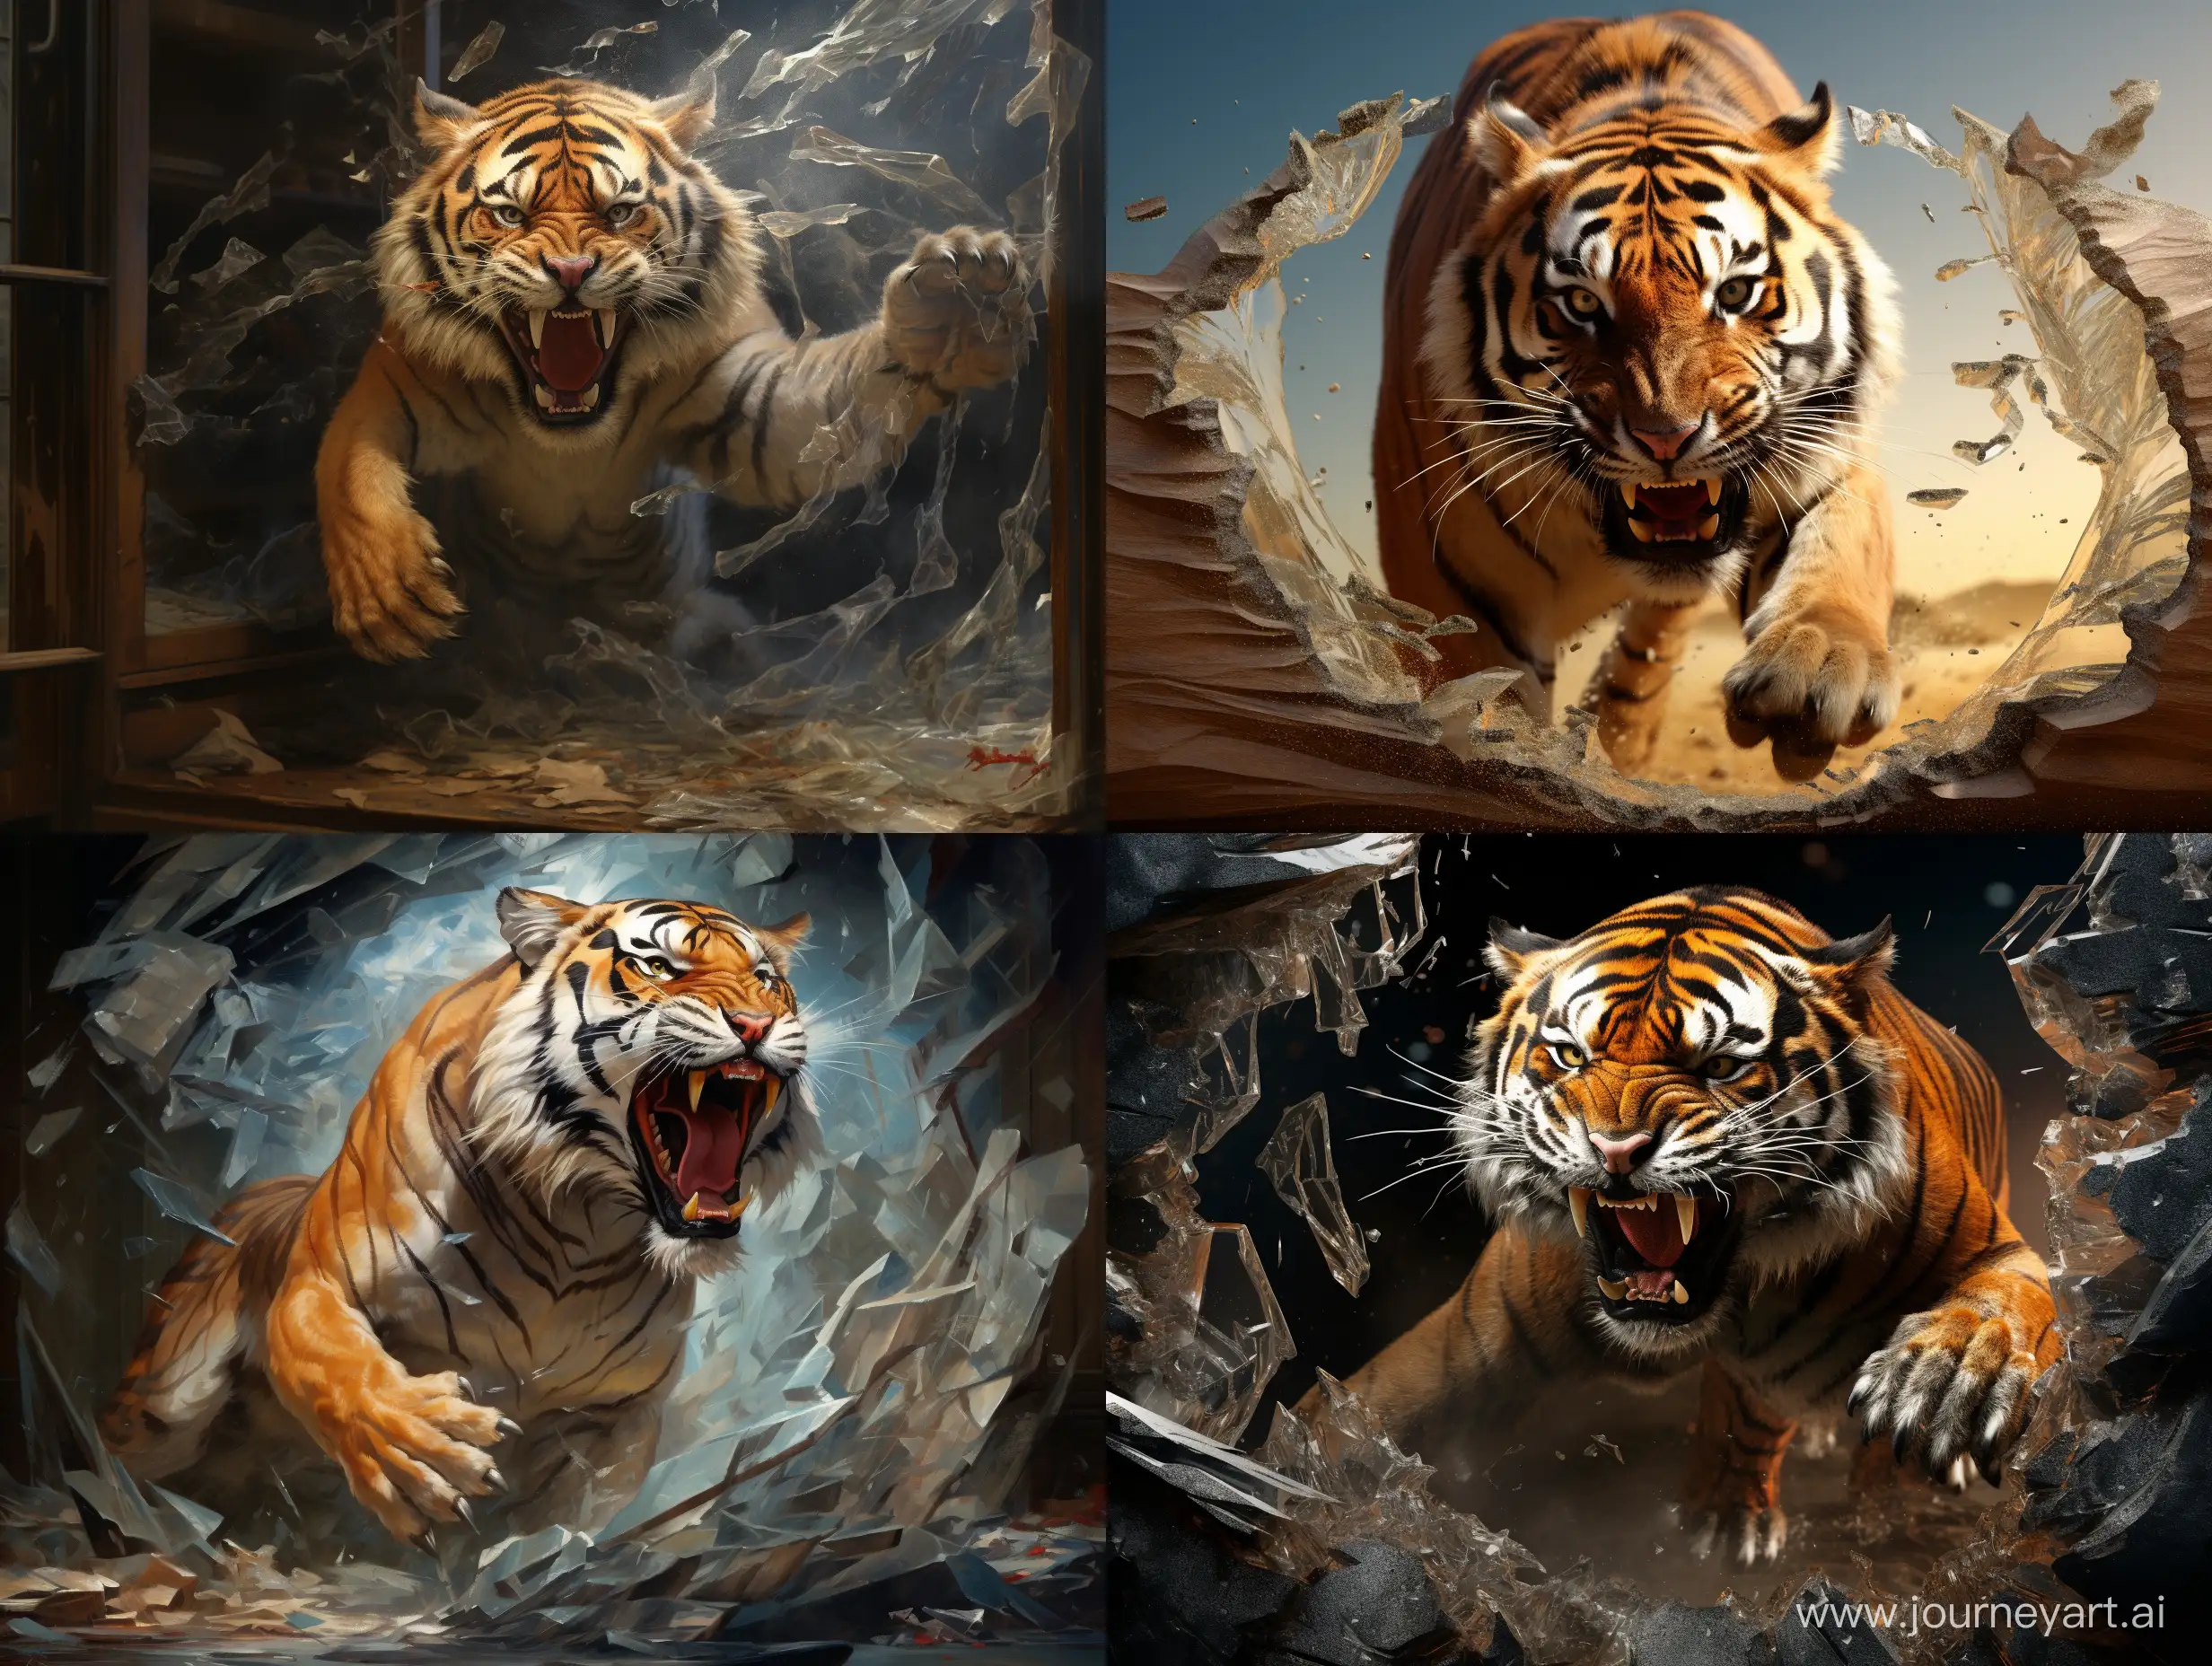 Fierce-Tiger-Jumping-Amidst-Broken-Glass-with-Angry-Claws